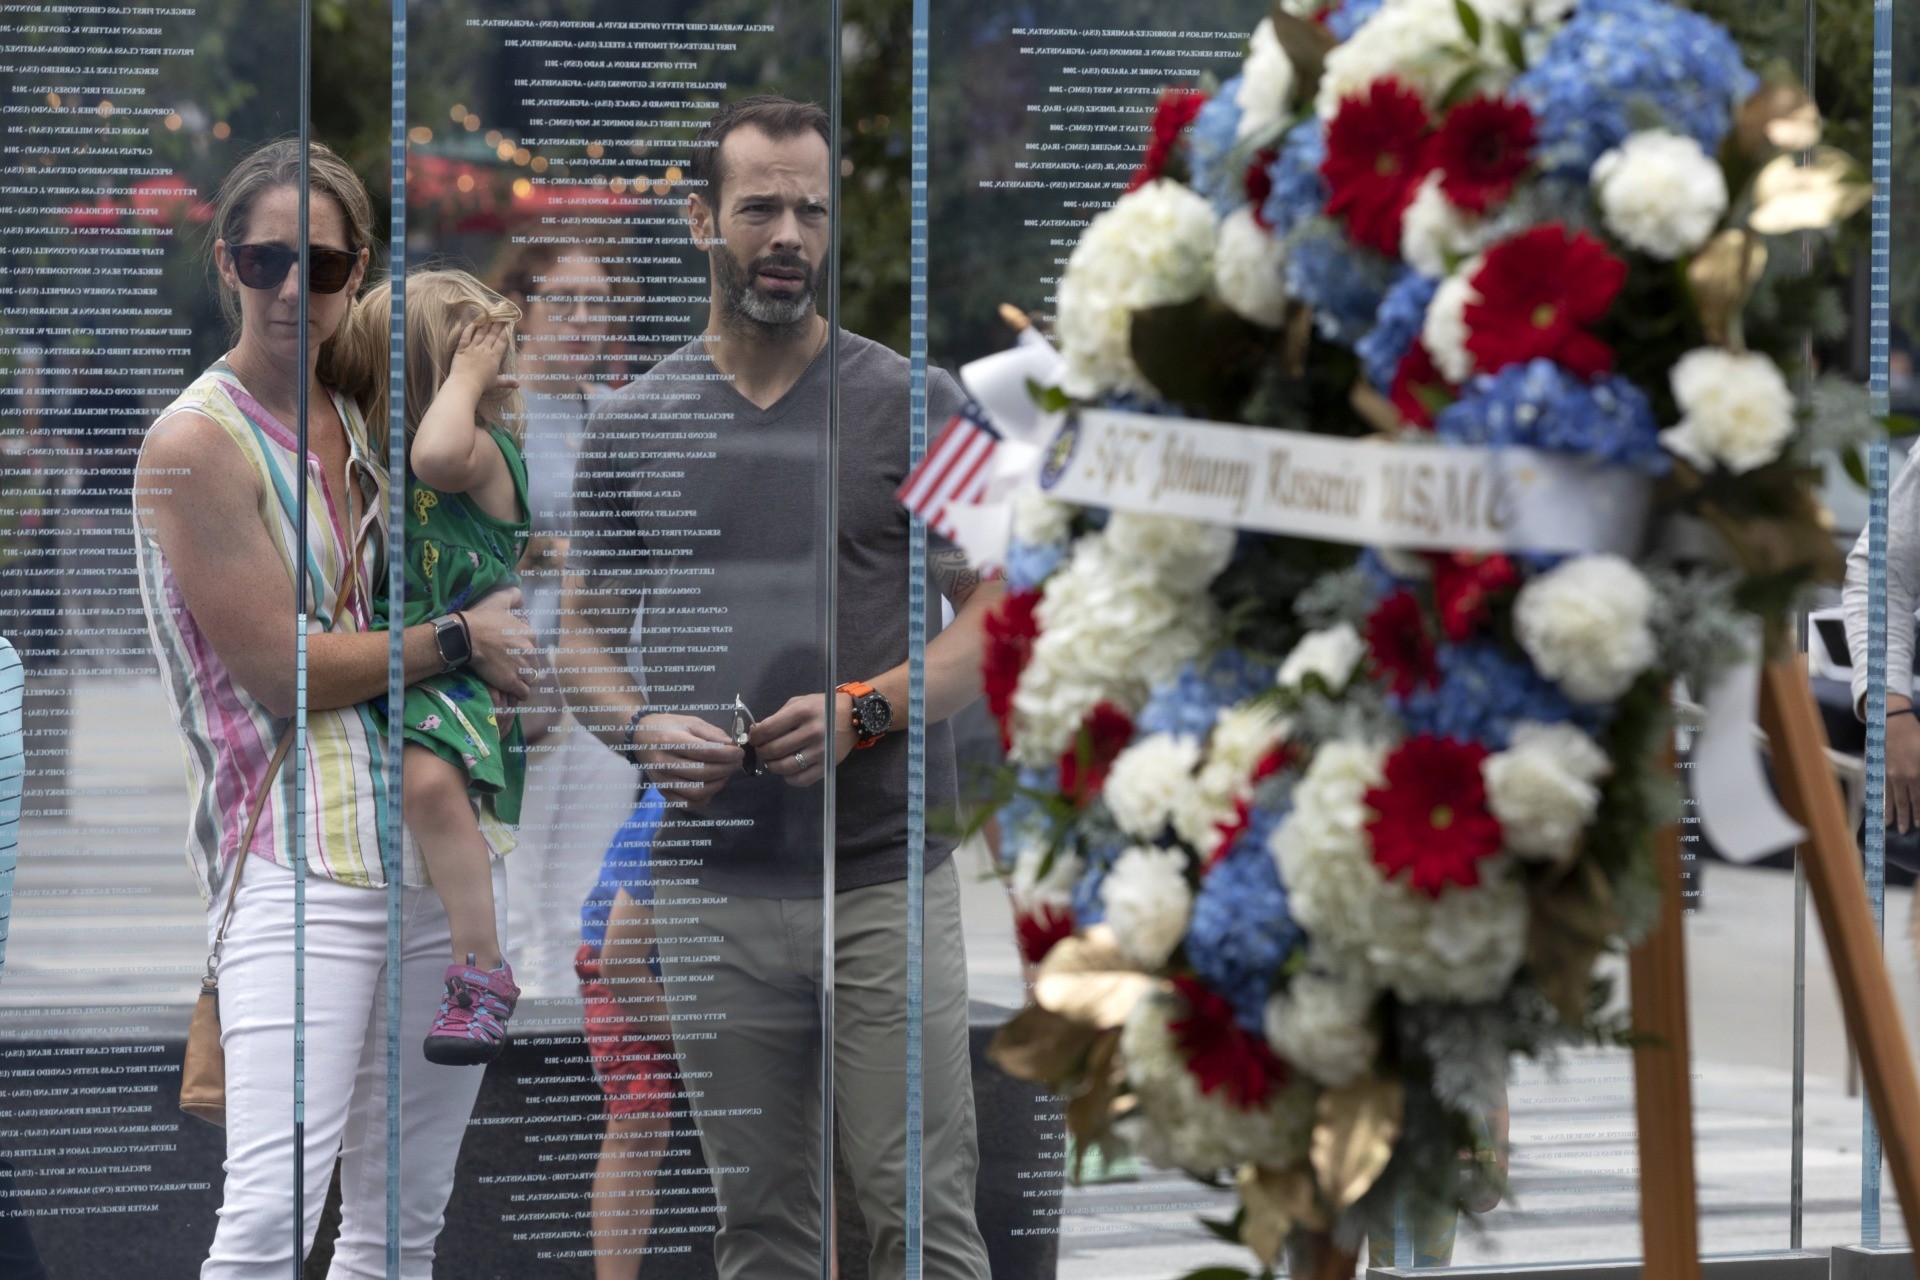 Retired Army Capt. Stephen Hunnewell stands with his wife Jessica and daughter Elizabeth behind a wreath in memory of Marine Sgt. Johanny Rosario Pichardo from Lawrence, Mass., following a ceremony at the Massachusetts Fallen Heroes Memorial, Saturday, Aug. 28, 2021, in Boston.The ceremony was held to honor the U.S. service members killed in a suicide bombing at the airport in Kabul, Afghanistan, including Sgt. Rosario Pichardo. (AP Photo/Michael Dwyer)